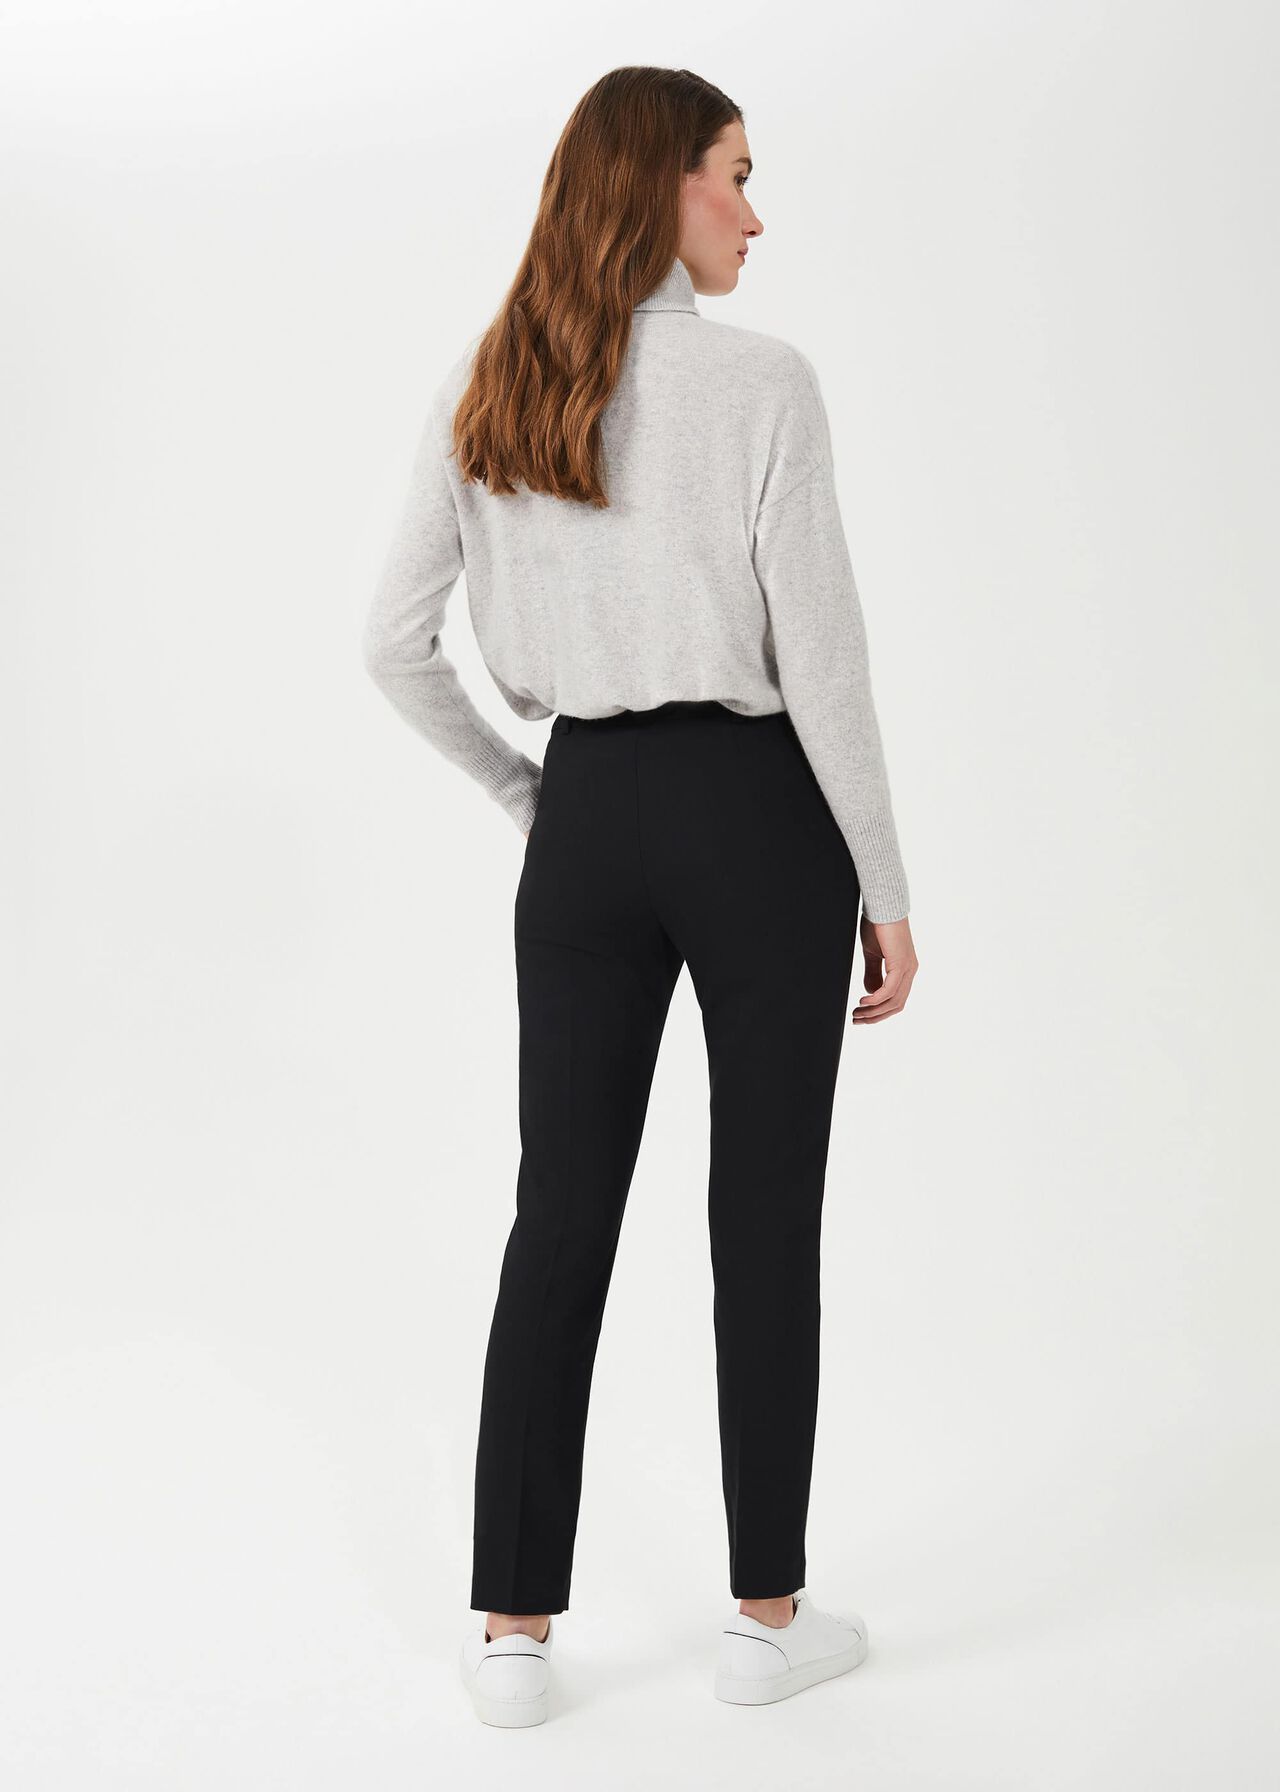 Petite Quin Tapered Trousers With Stretch, Black, hi-res